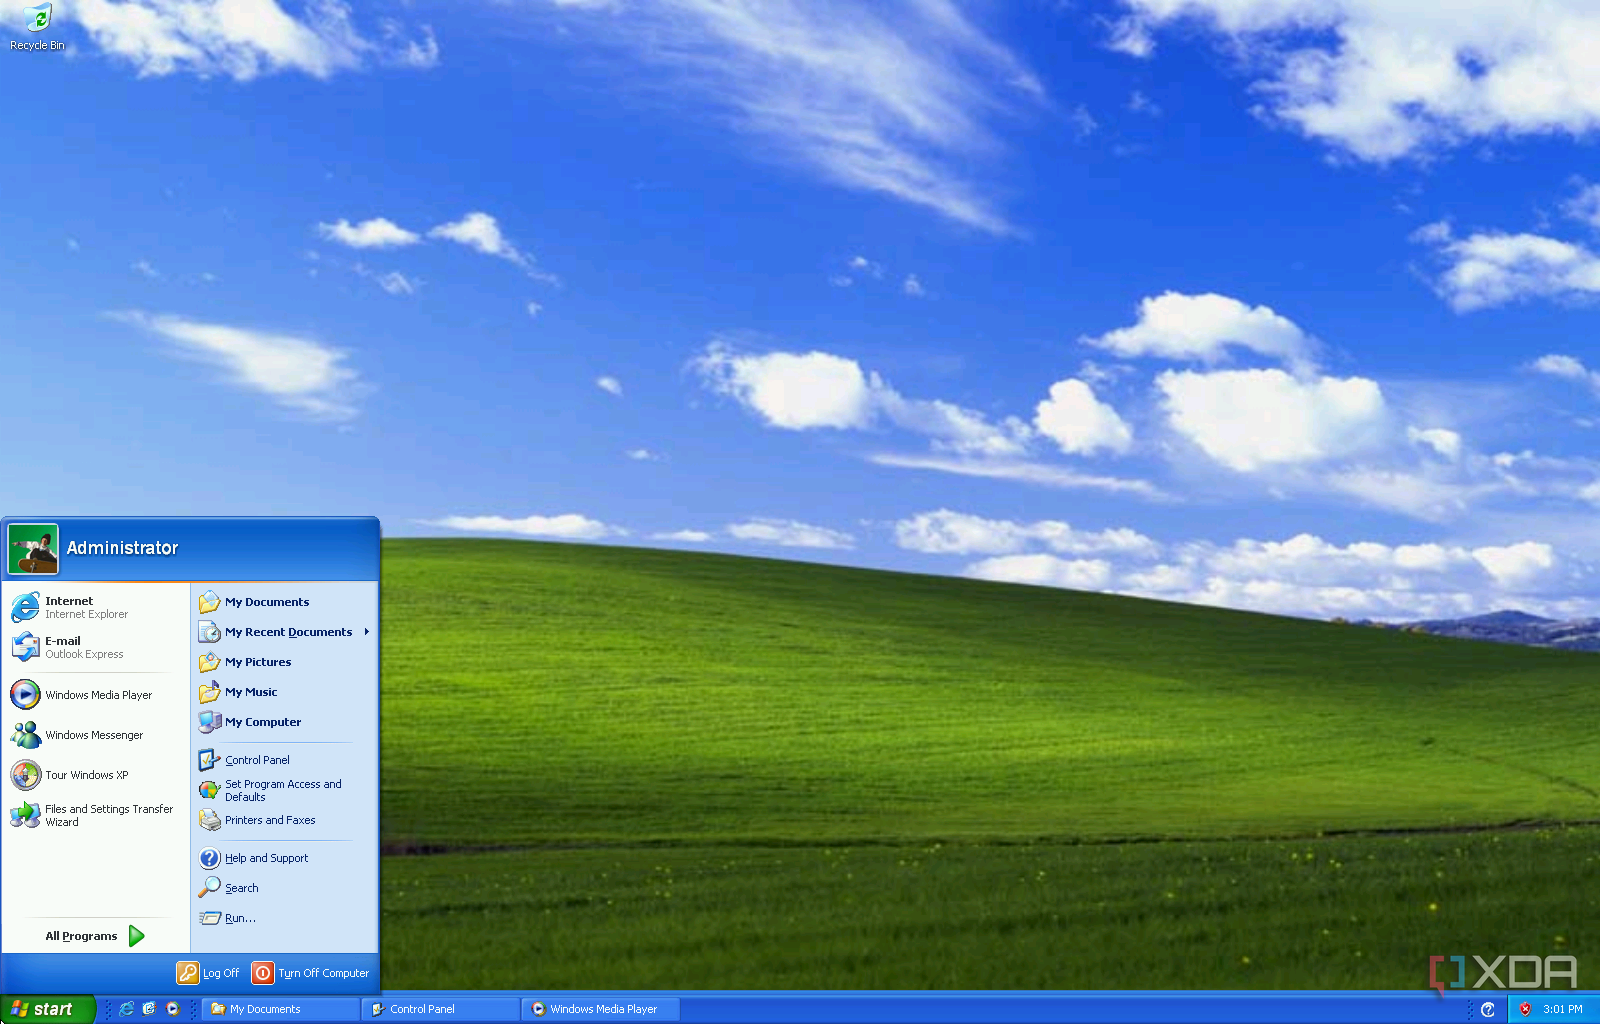 Support for Windows XP and Vista ending soon - #192 by GeneralProjects -  Announcements - Developer Forum